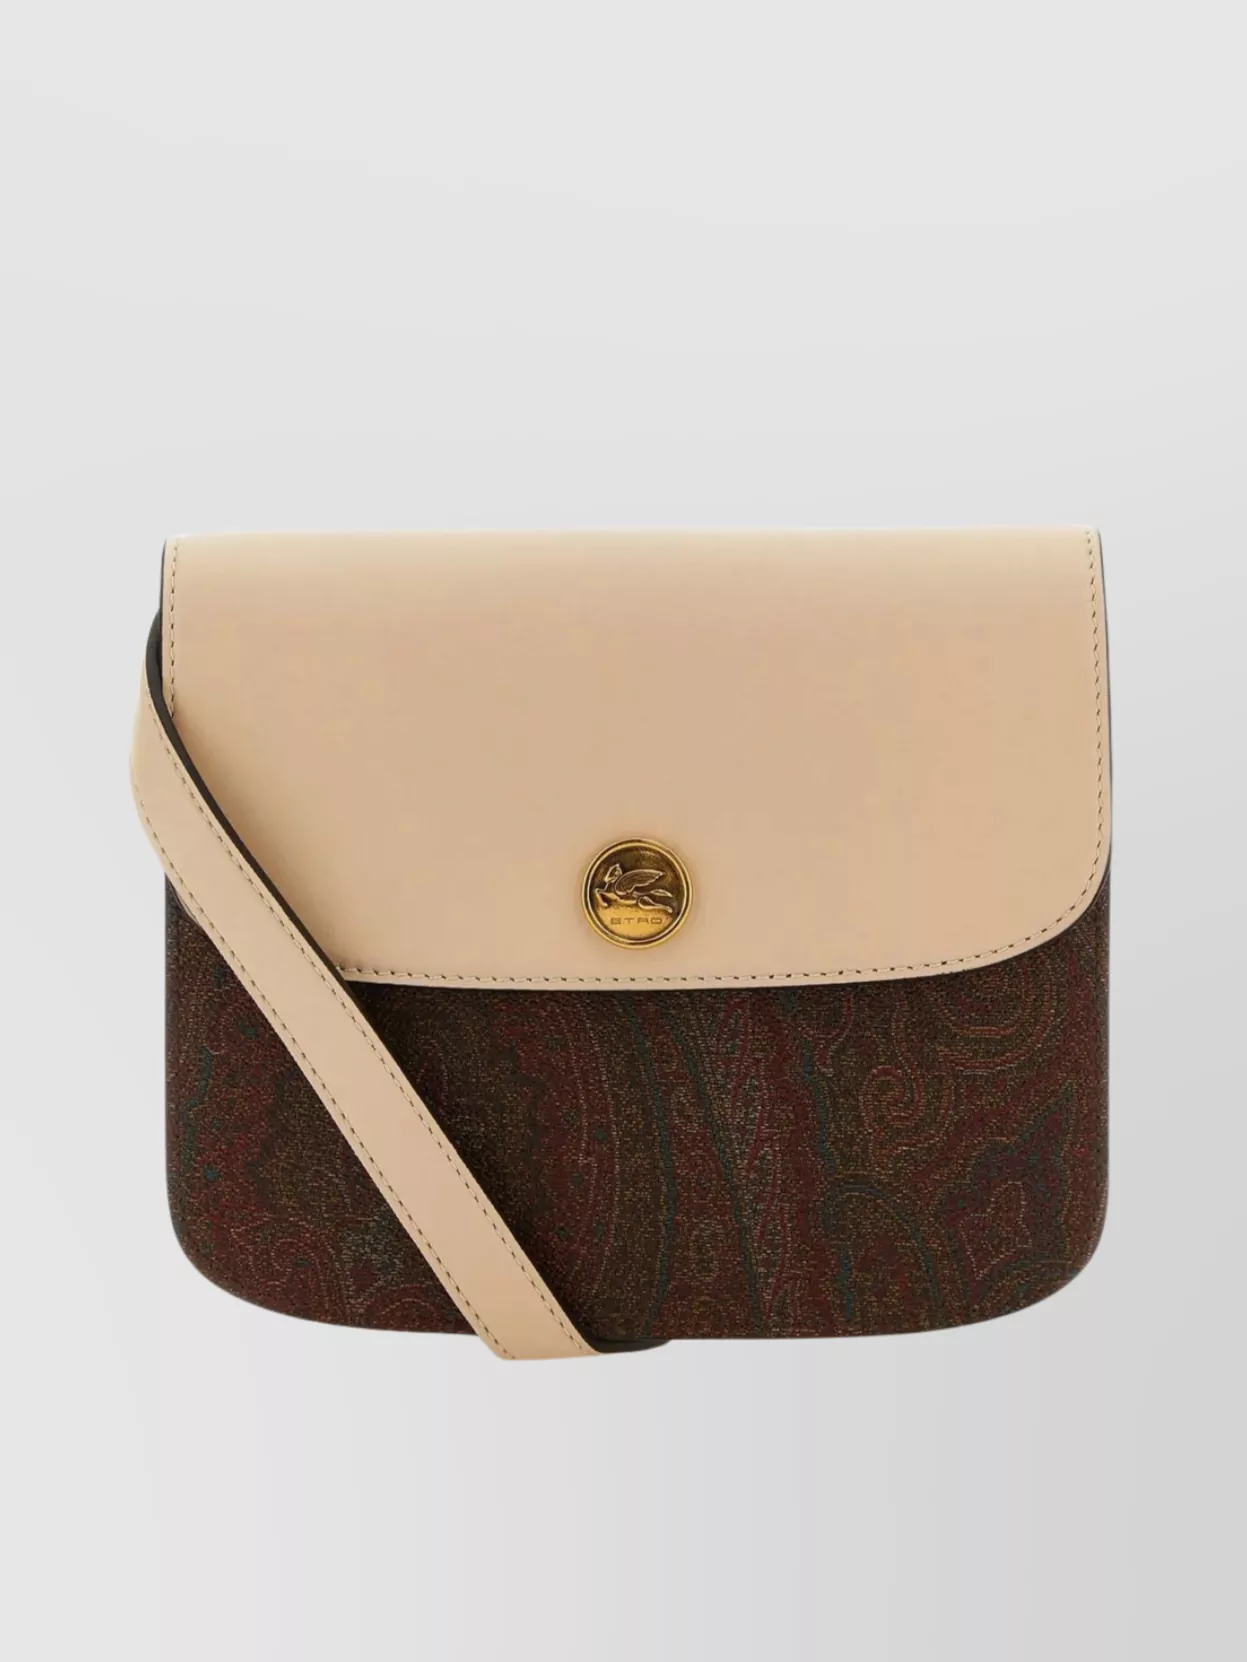 Etro Canvas And Leather Contrast Textured Crossbody Bag In Brown